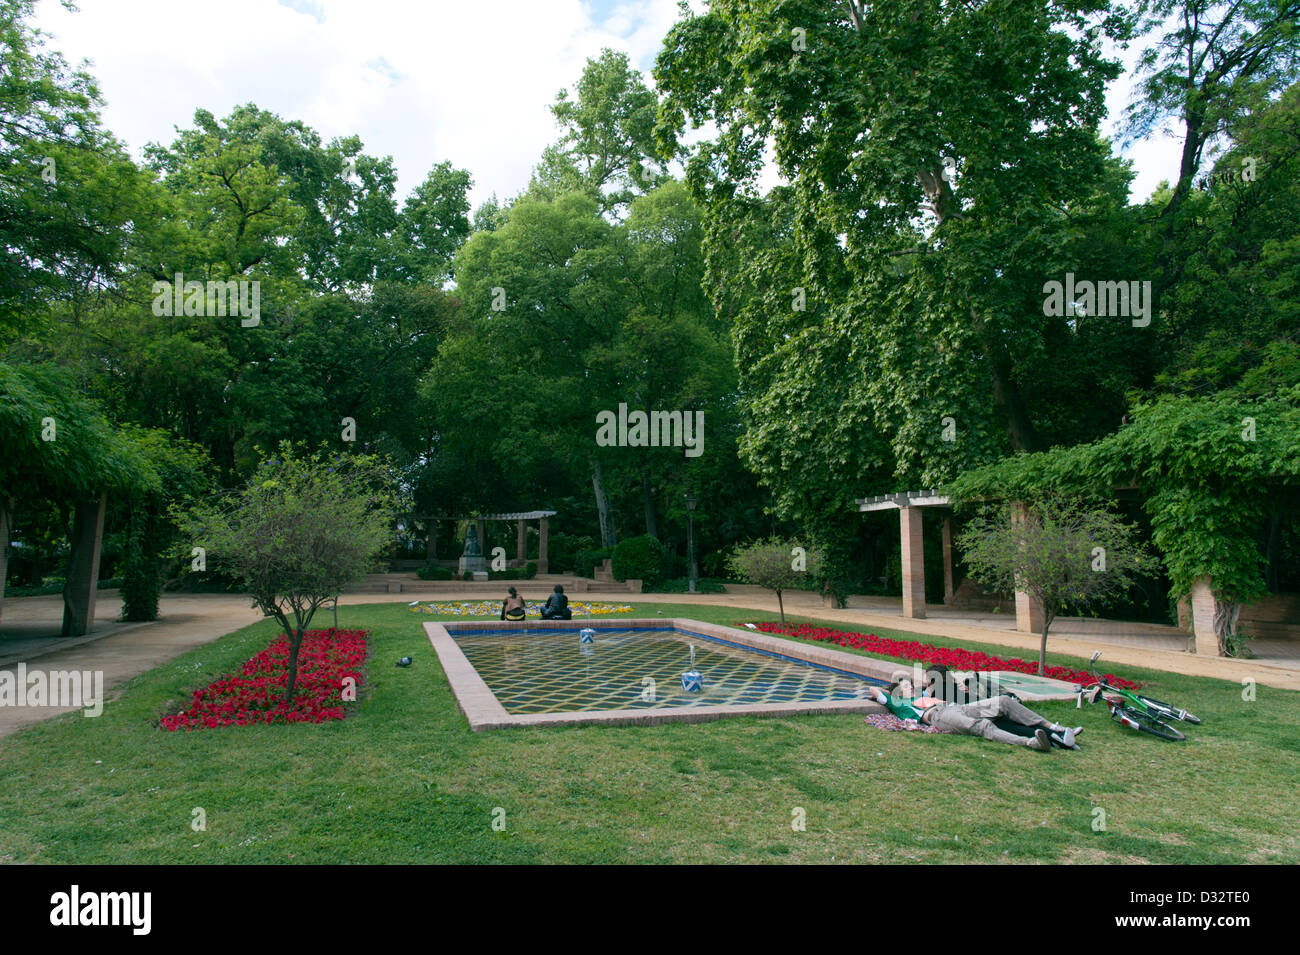 Young people relaxing in Maria Luisa Park, Seville, Spain Stock Photo